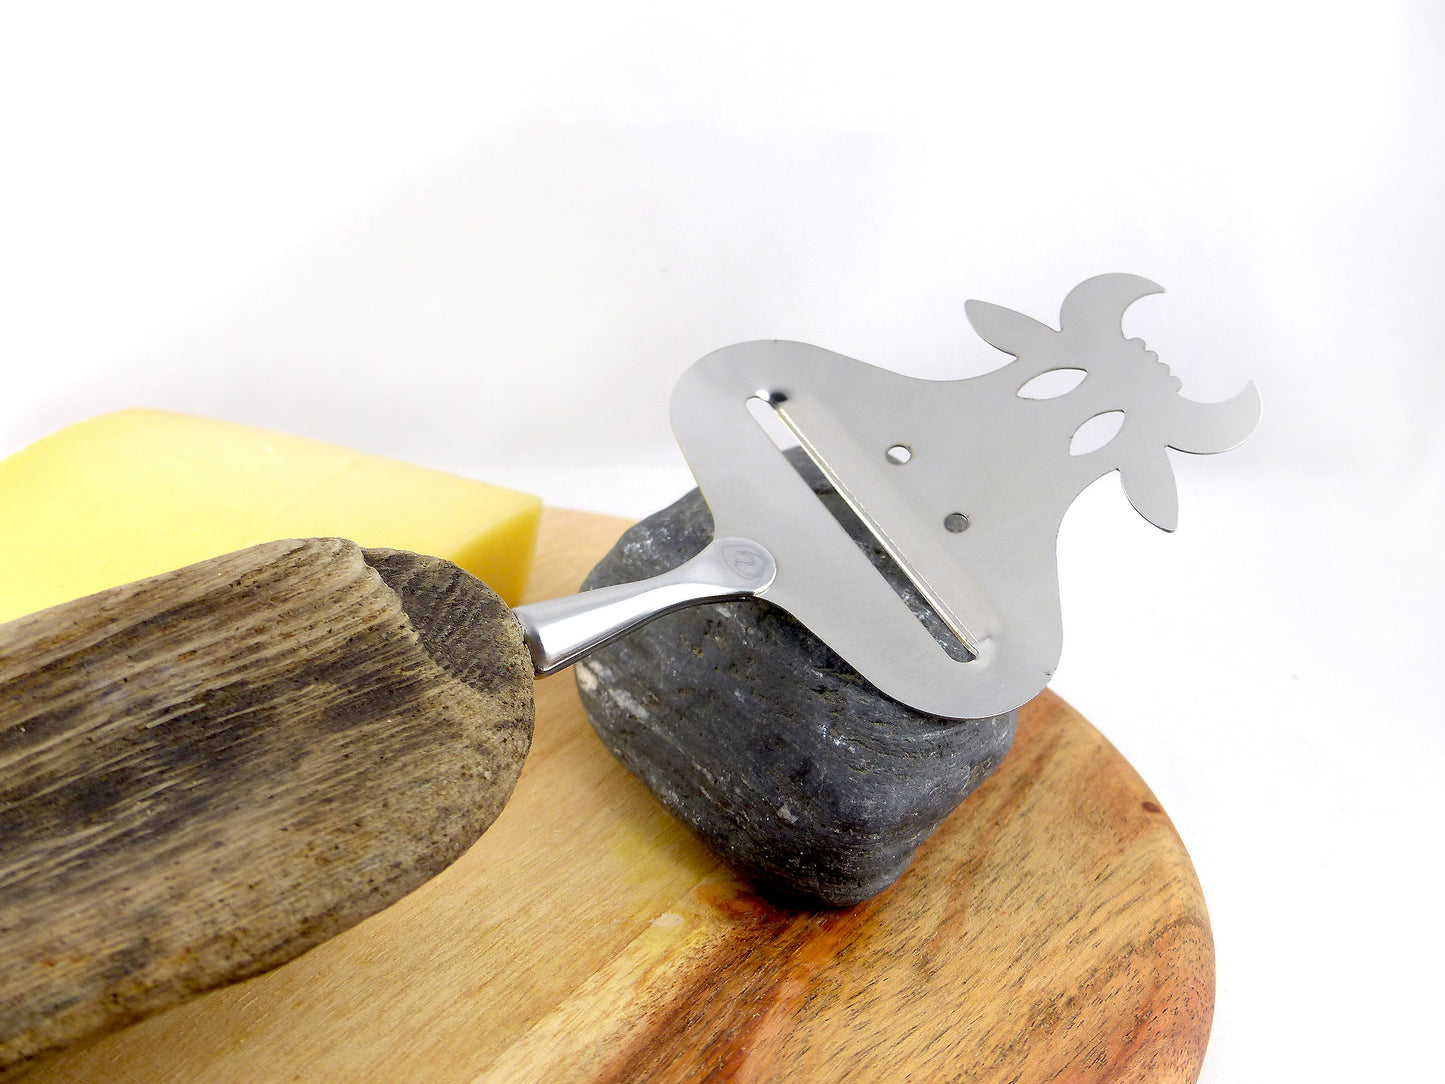 CHEESE SLICER 'Cow Carla' with DRIFTWOOD handle, cow cutlery, handcrafted by StoneSoftArt